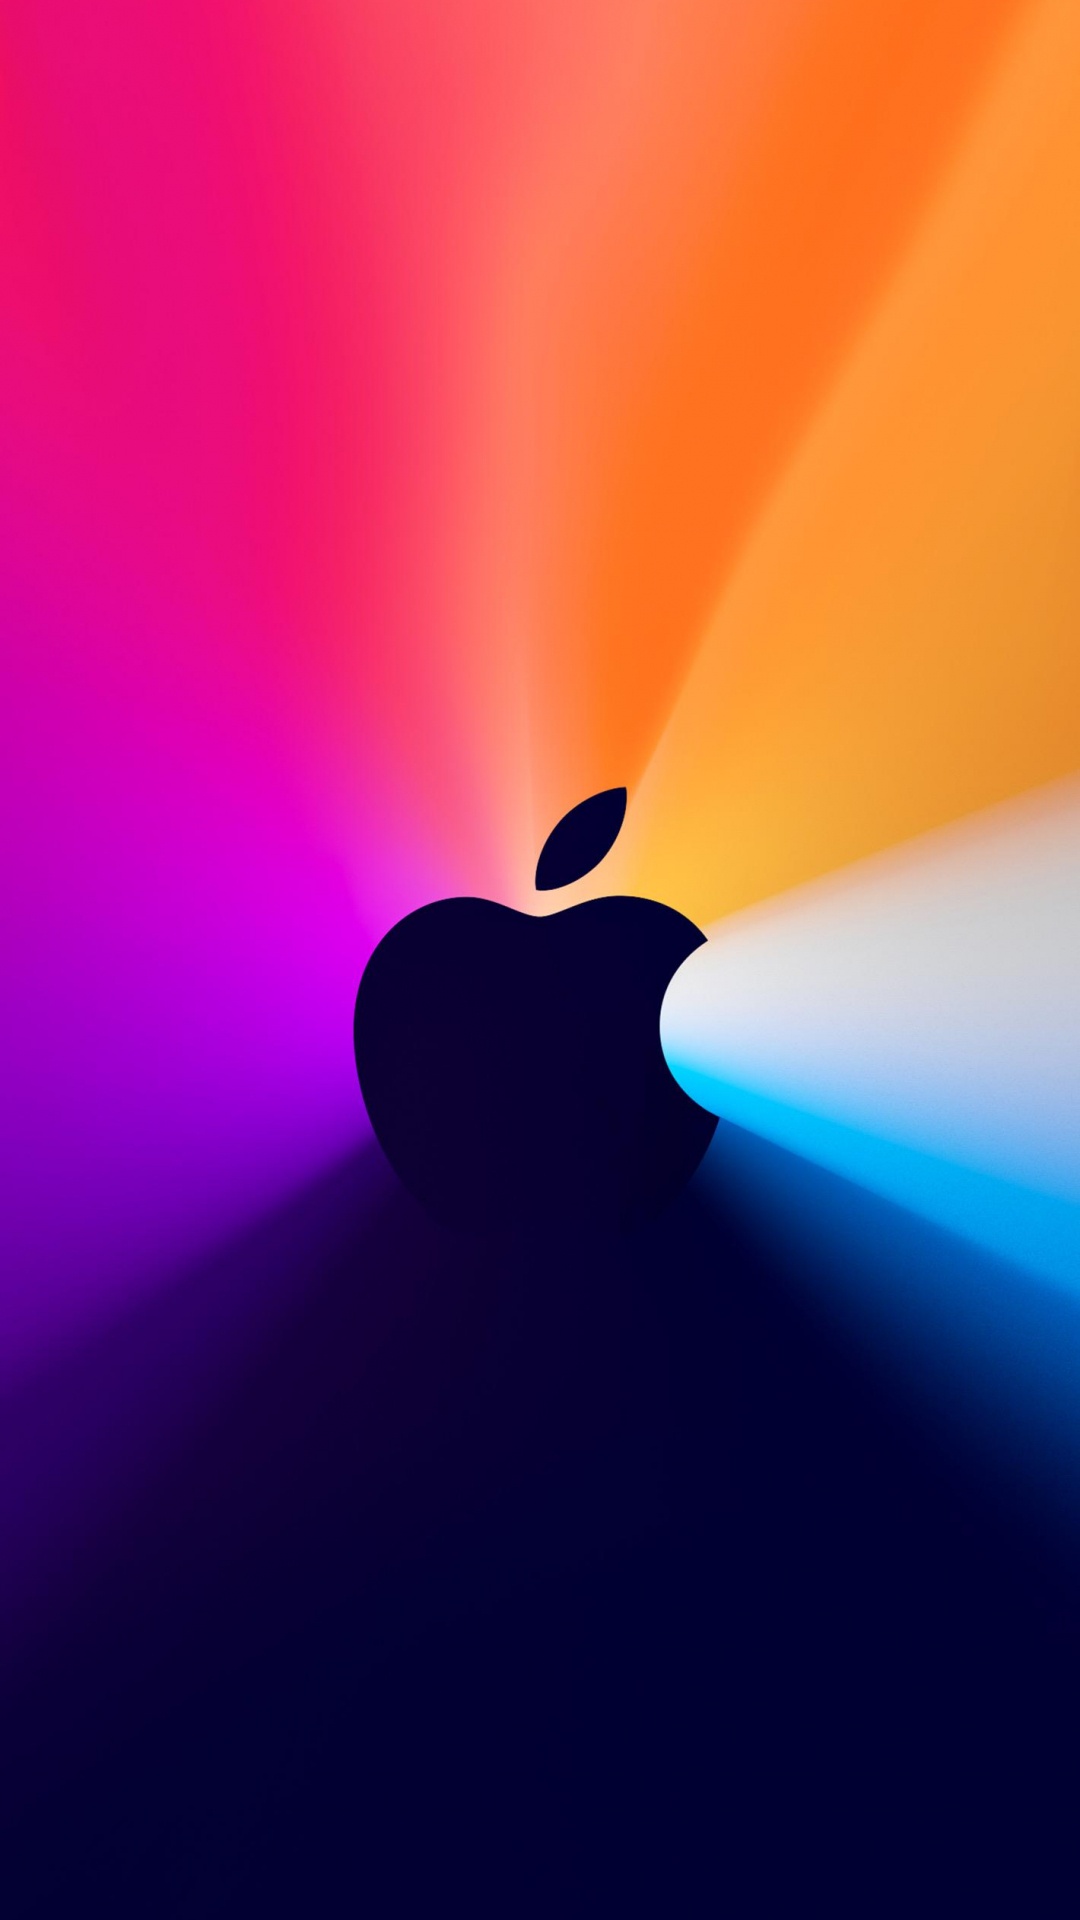 Apple, IPhone, Apples, One More Thing, Homepod. Wallpaper in 1080x1920 Resolution